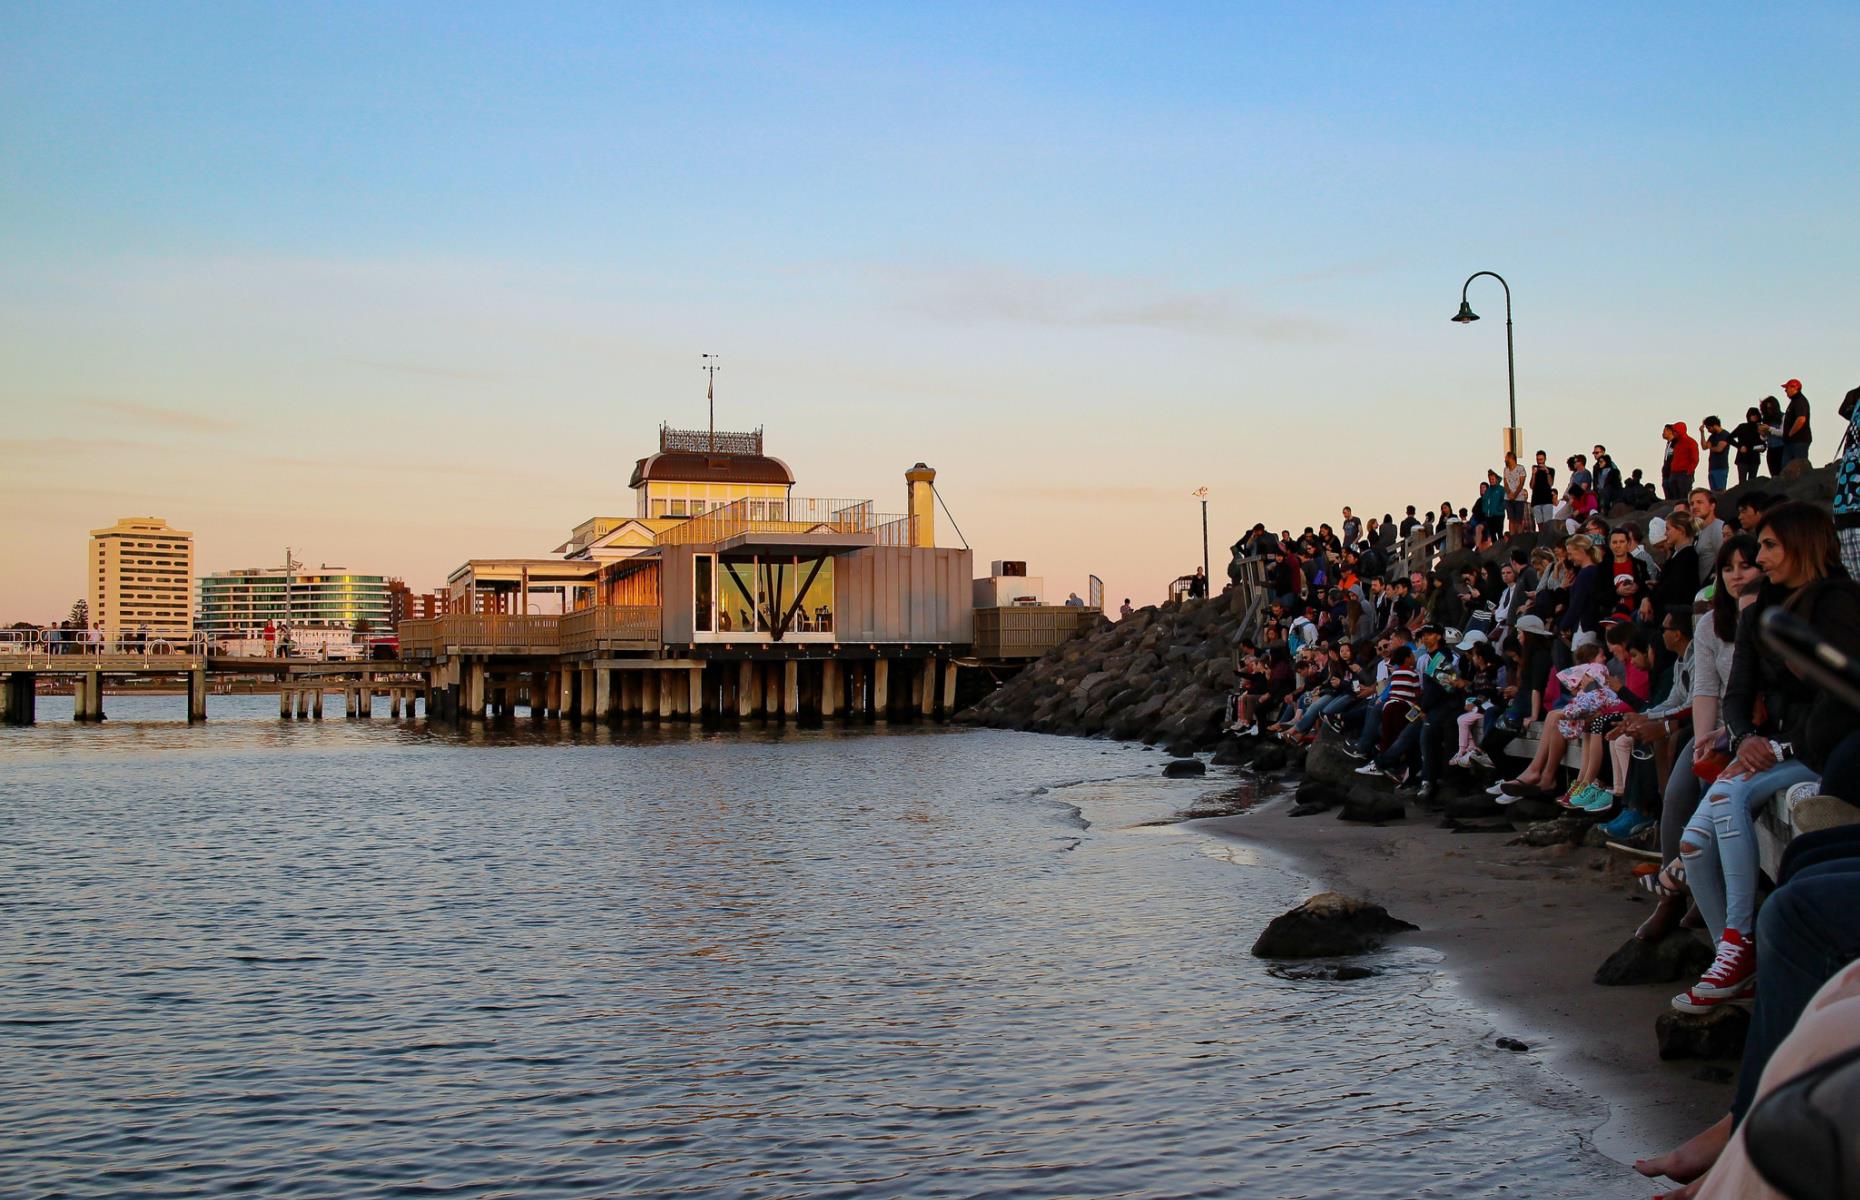 <p>Forget the rides at St Kilda's Luna Park and head to its heritage-listed pier at dusk instead to watch a spectacle of the natural kind. A colony of little penguins return to their home at St Kilda Breakwater after a day at sea. Make for the viewing platform at the head of the pier for just before sunset then keep a look out – you’re likely to see rakali (native water rats) from the breakwater too, another protected species. </p>  <p><a href="https://www.loveexploring.com/galleries/128483/30-of-australias-most-beautiful-sites?page=1"><strong>30 of Australia's most beautiful sites</strong></a></p>